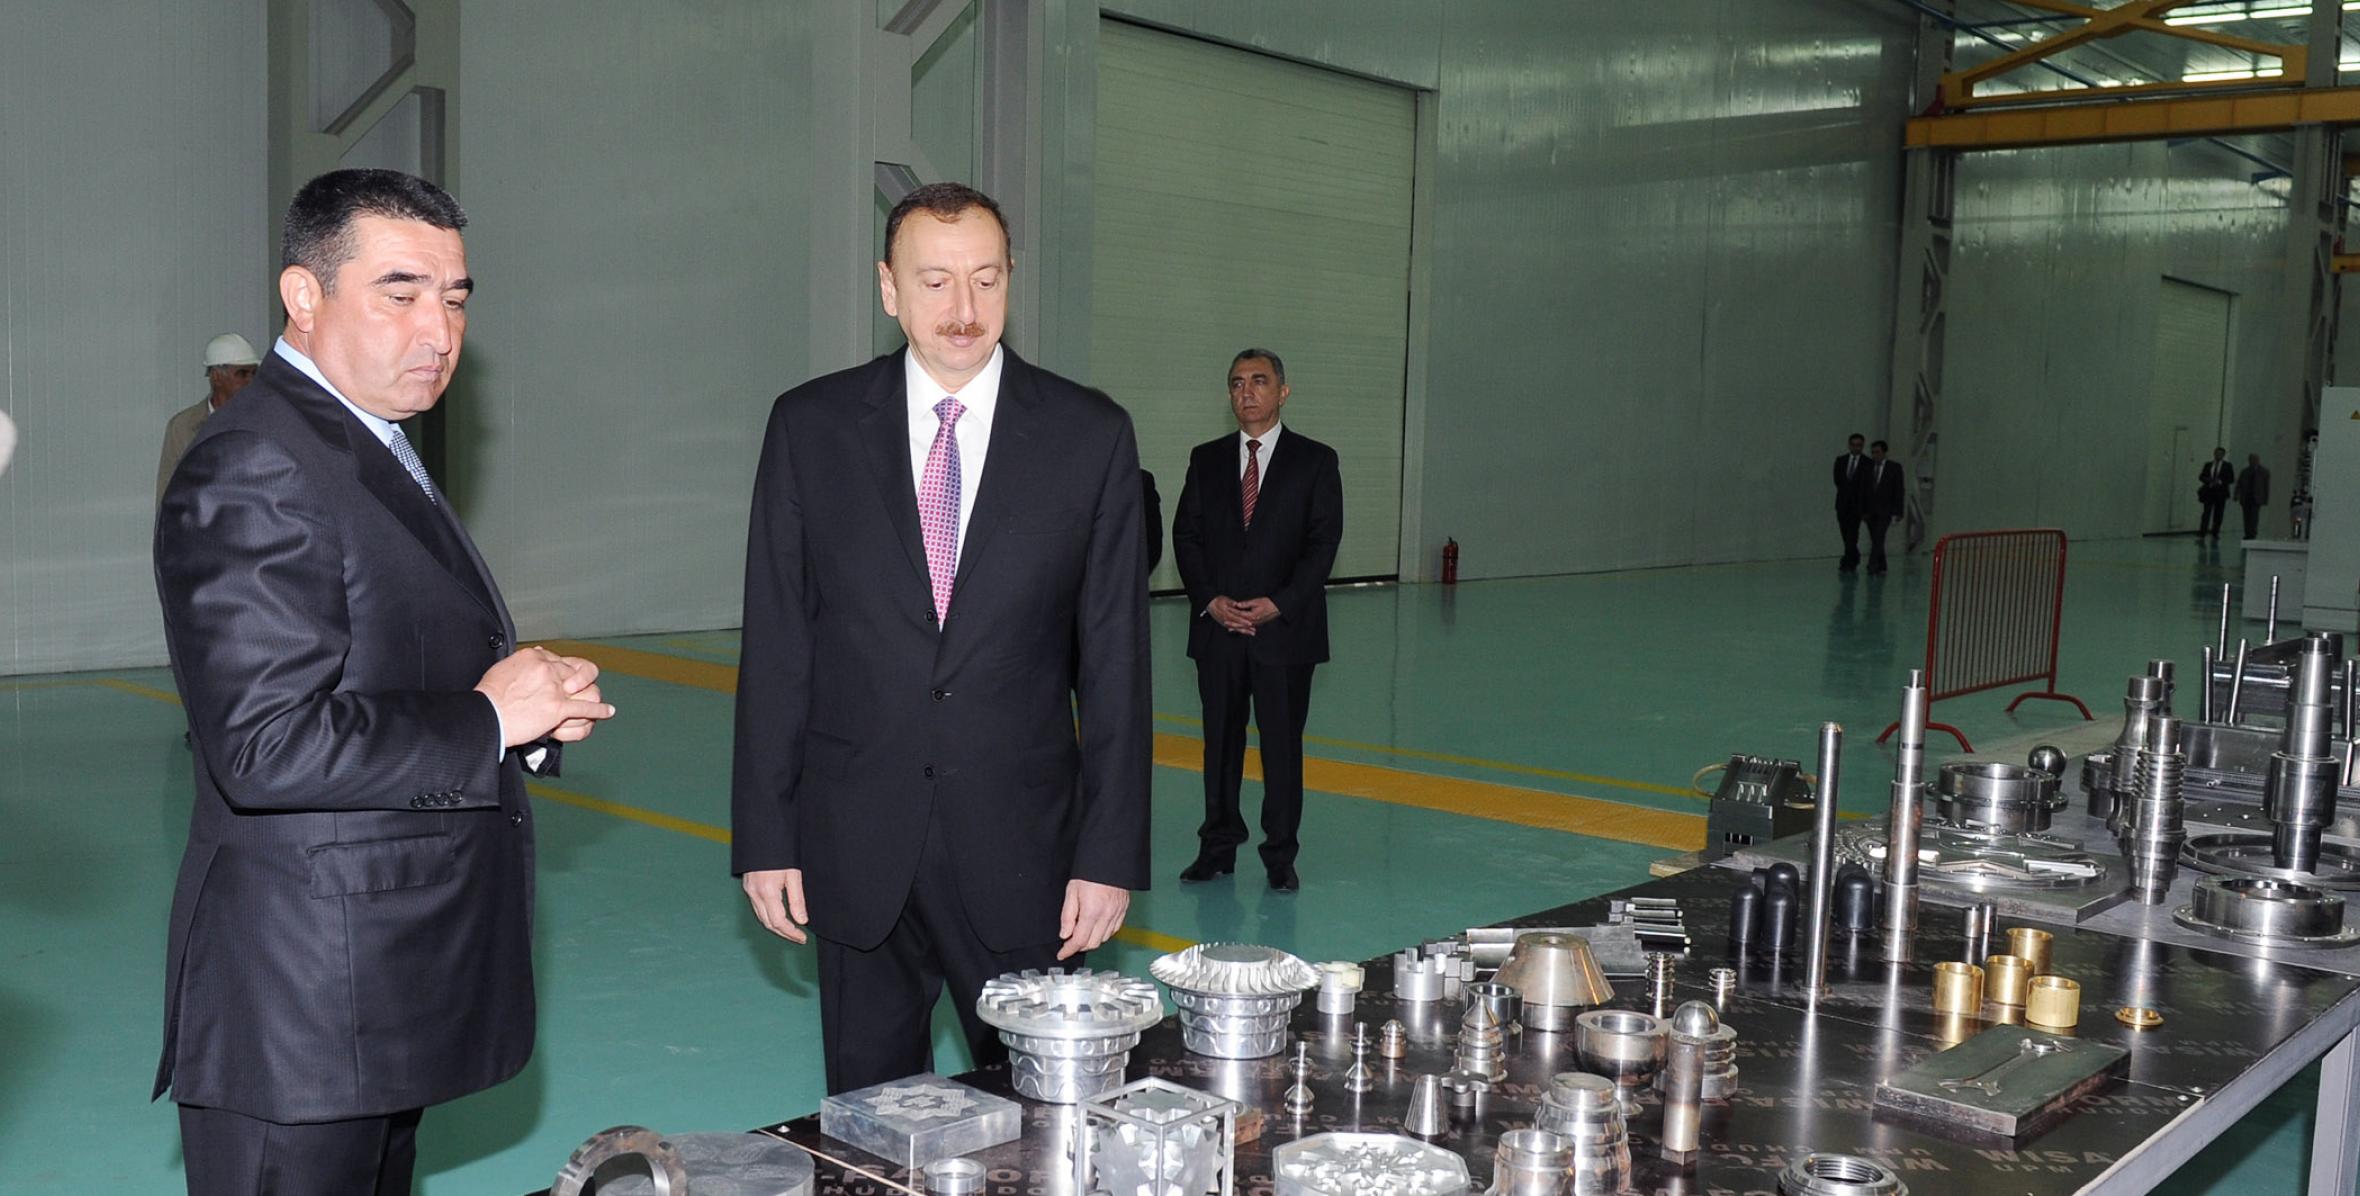 Ilham Aliyev examined the progress of expansion at a plant producing polymeric products in the Sumgayit Industrial Park